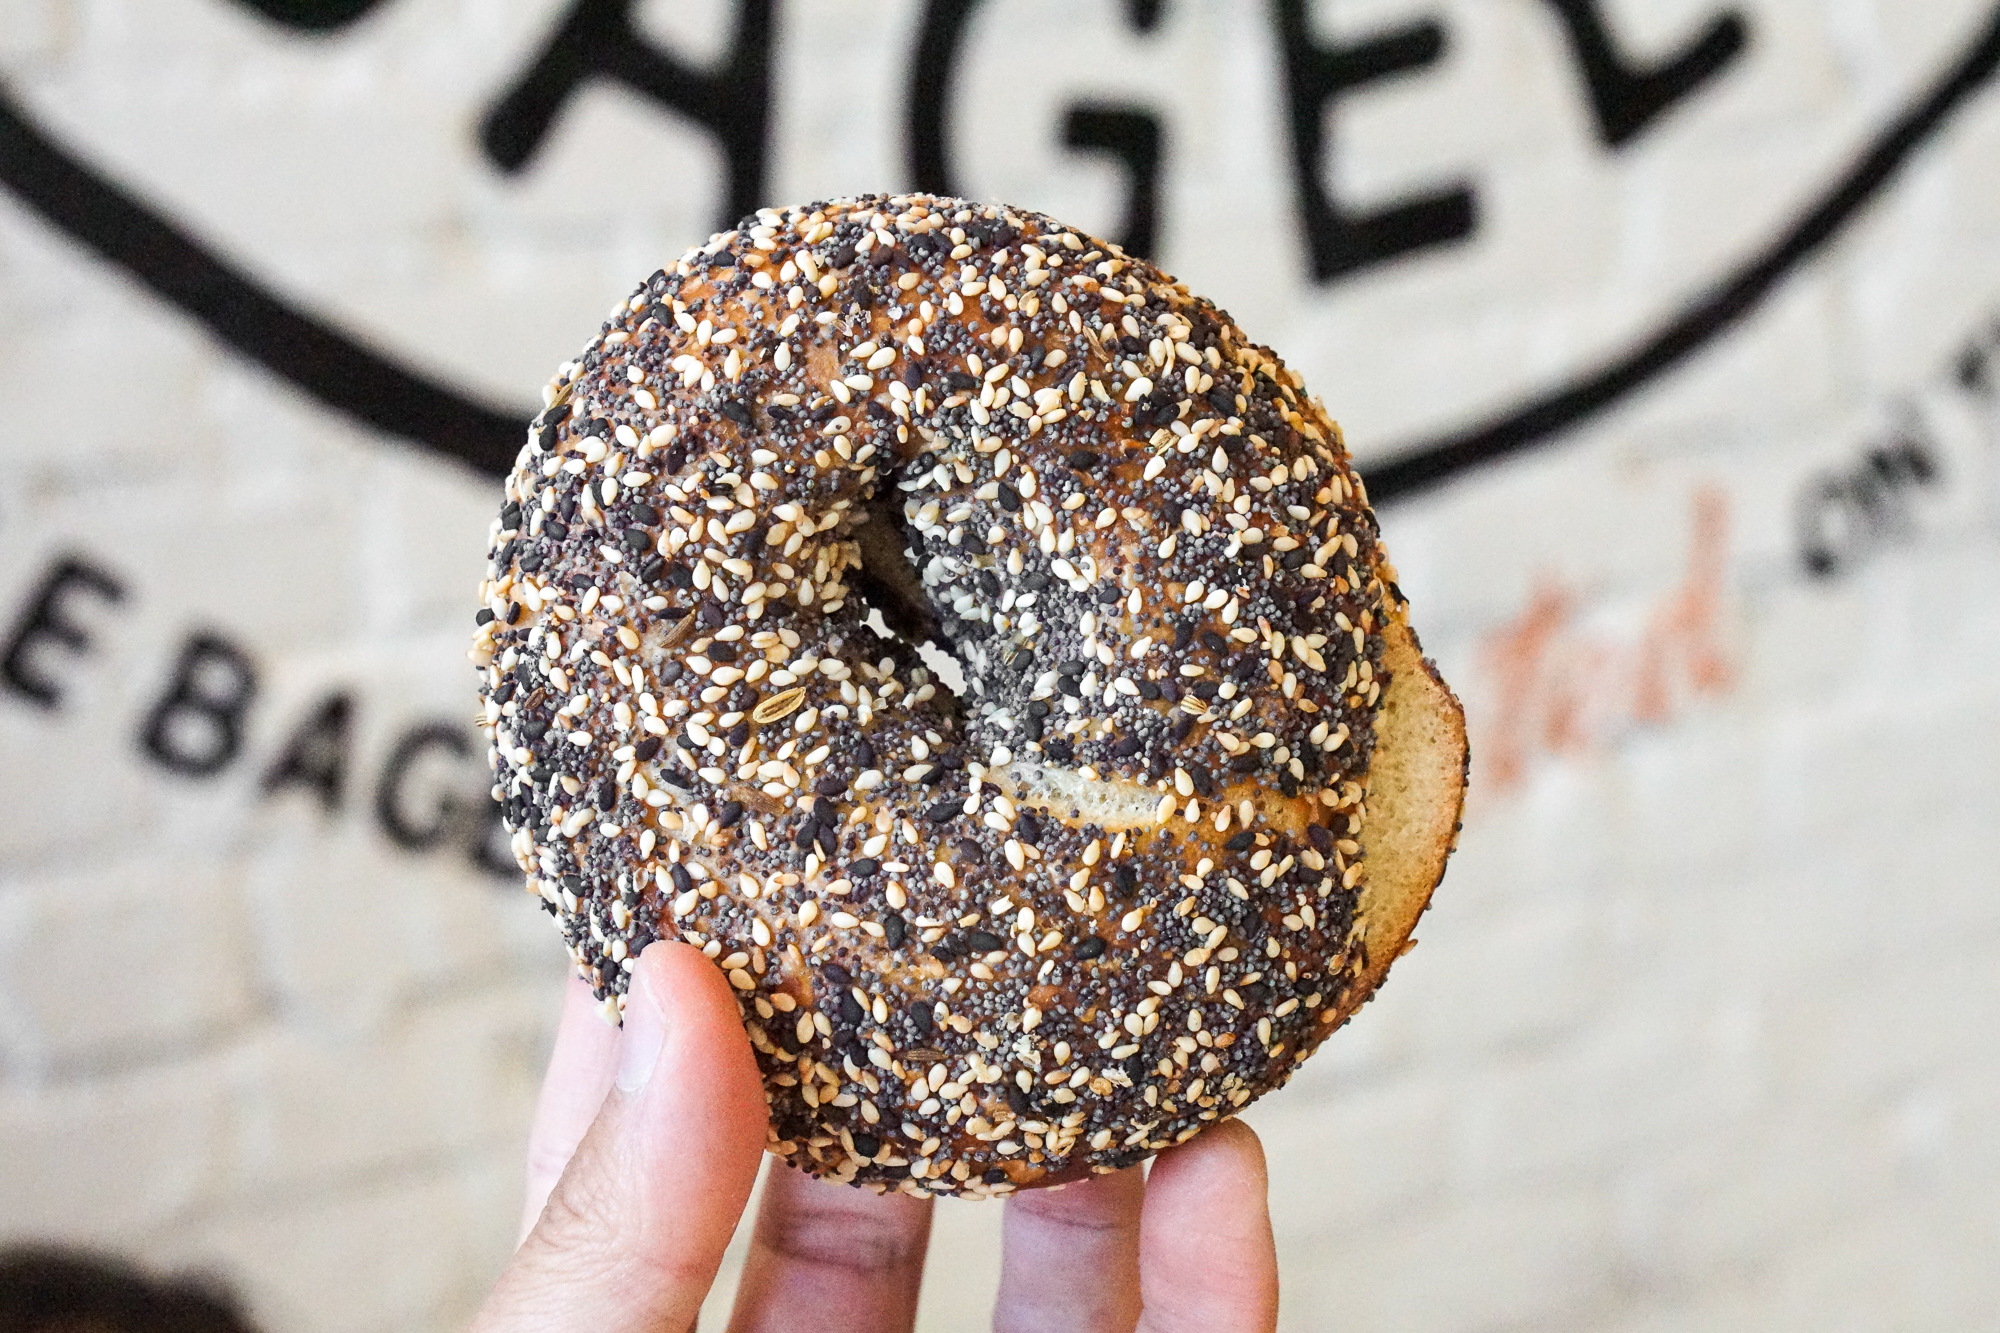 A bagel with toppings held by hand.